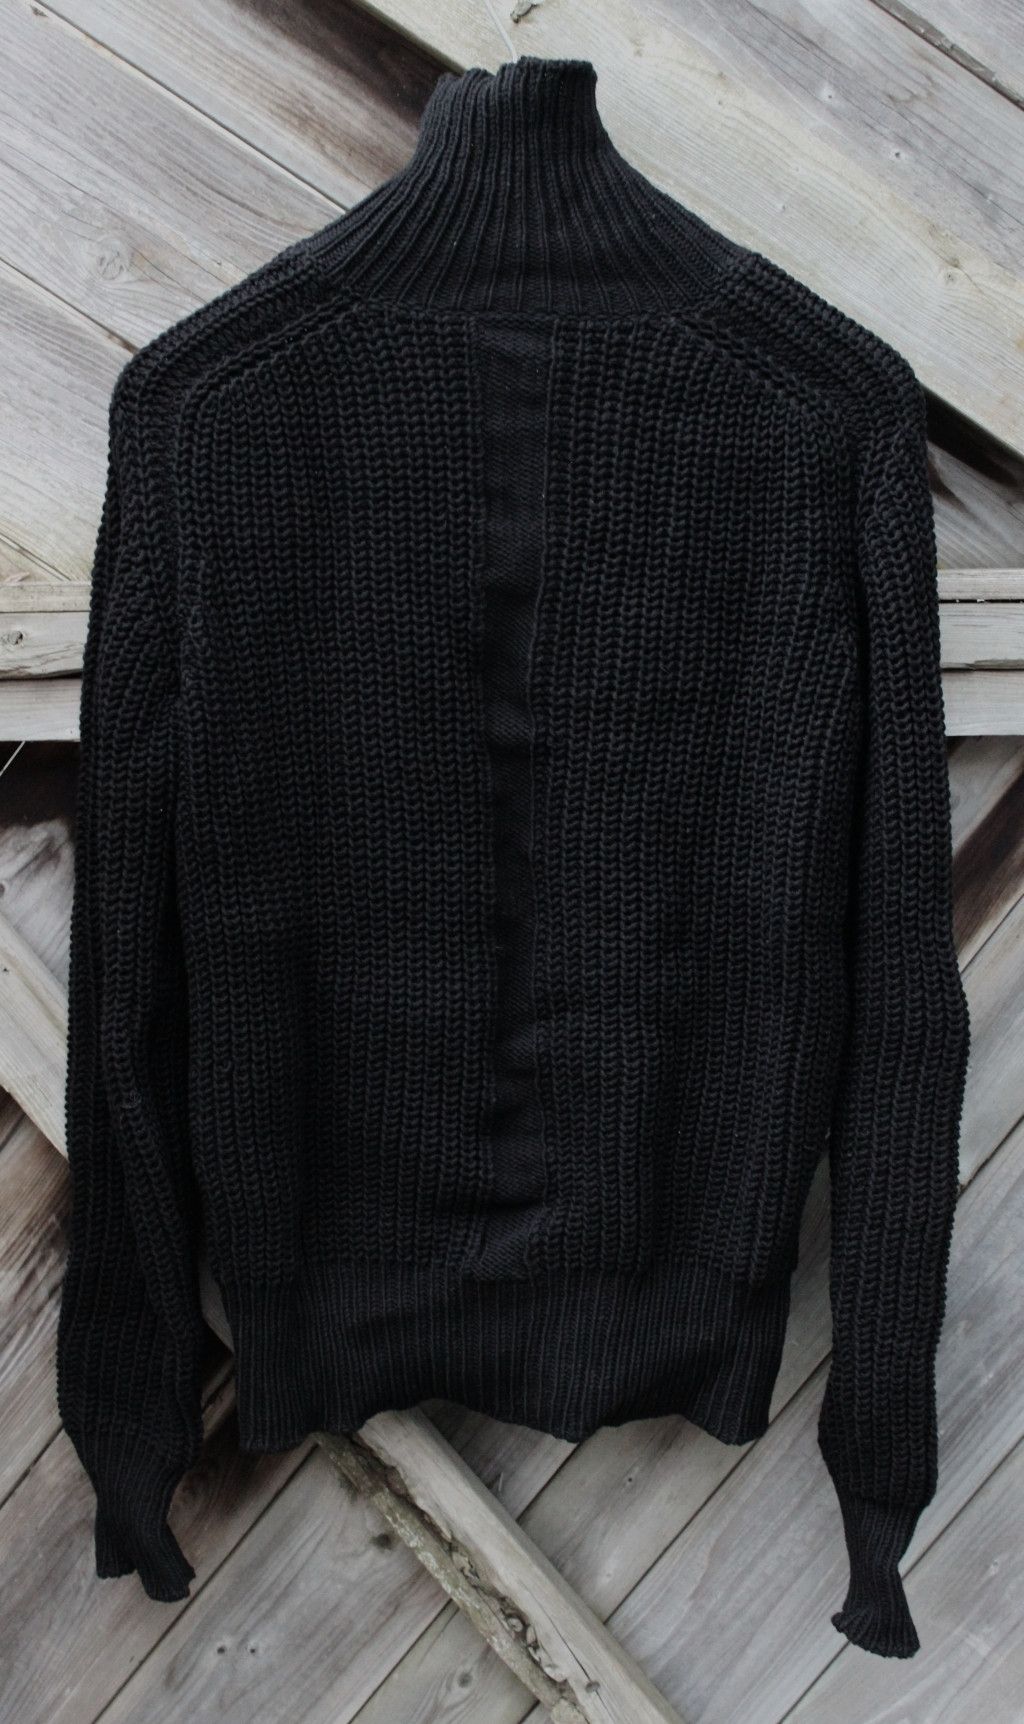 Rick Owens FW14 moody wool knit Size US M / EU 48-50 / 2 - 1 Preview